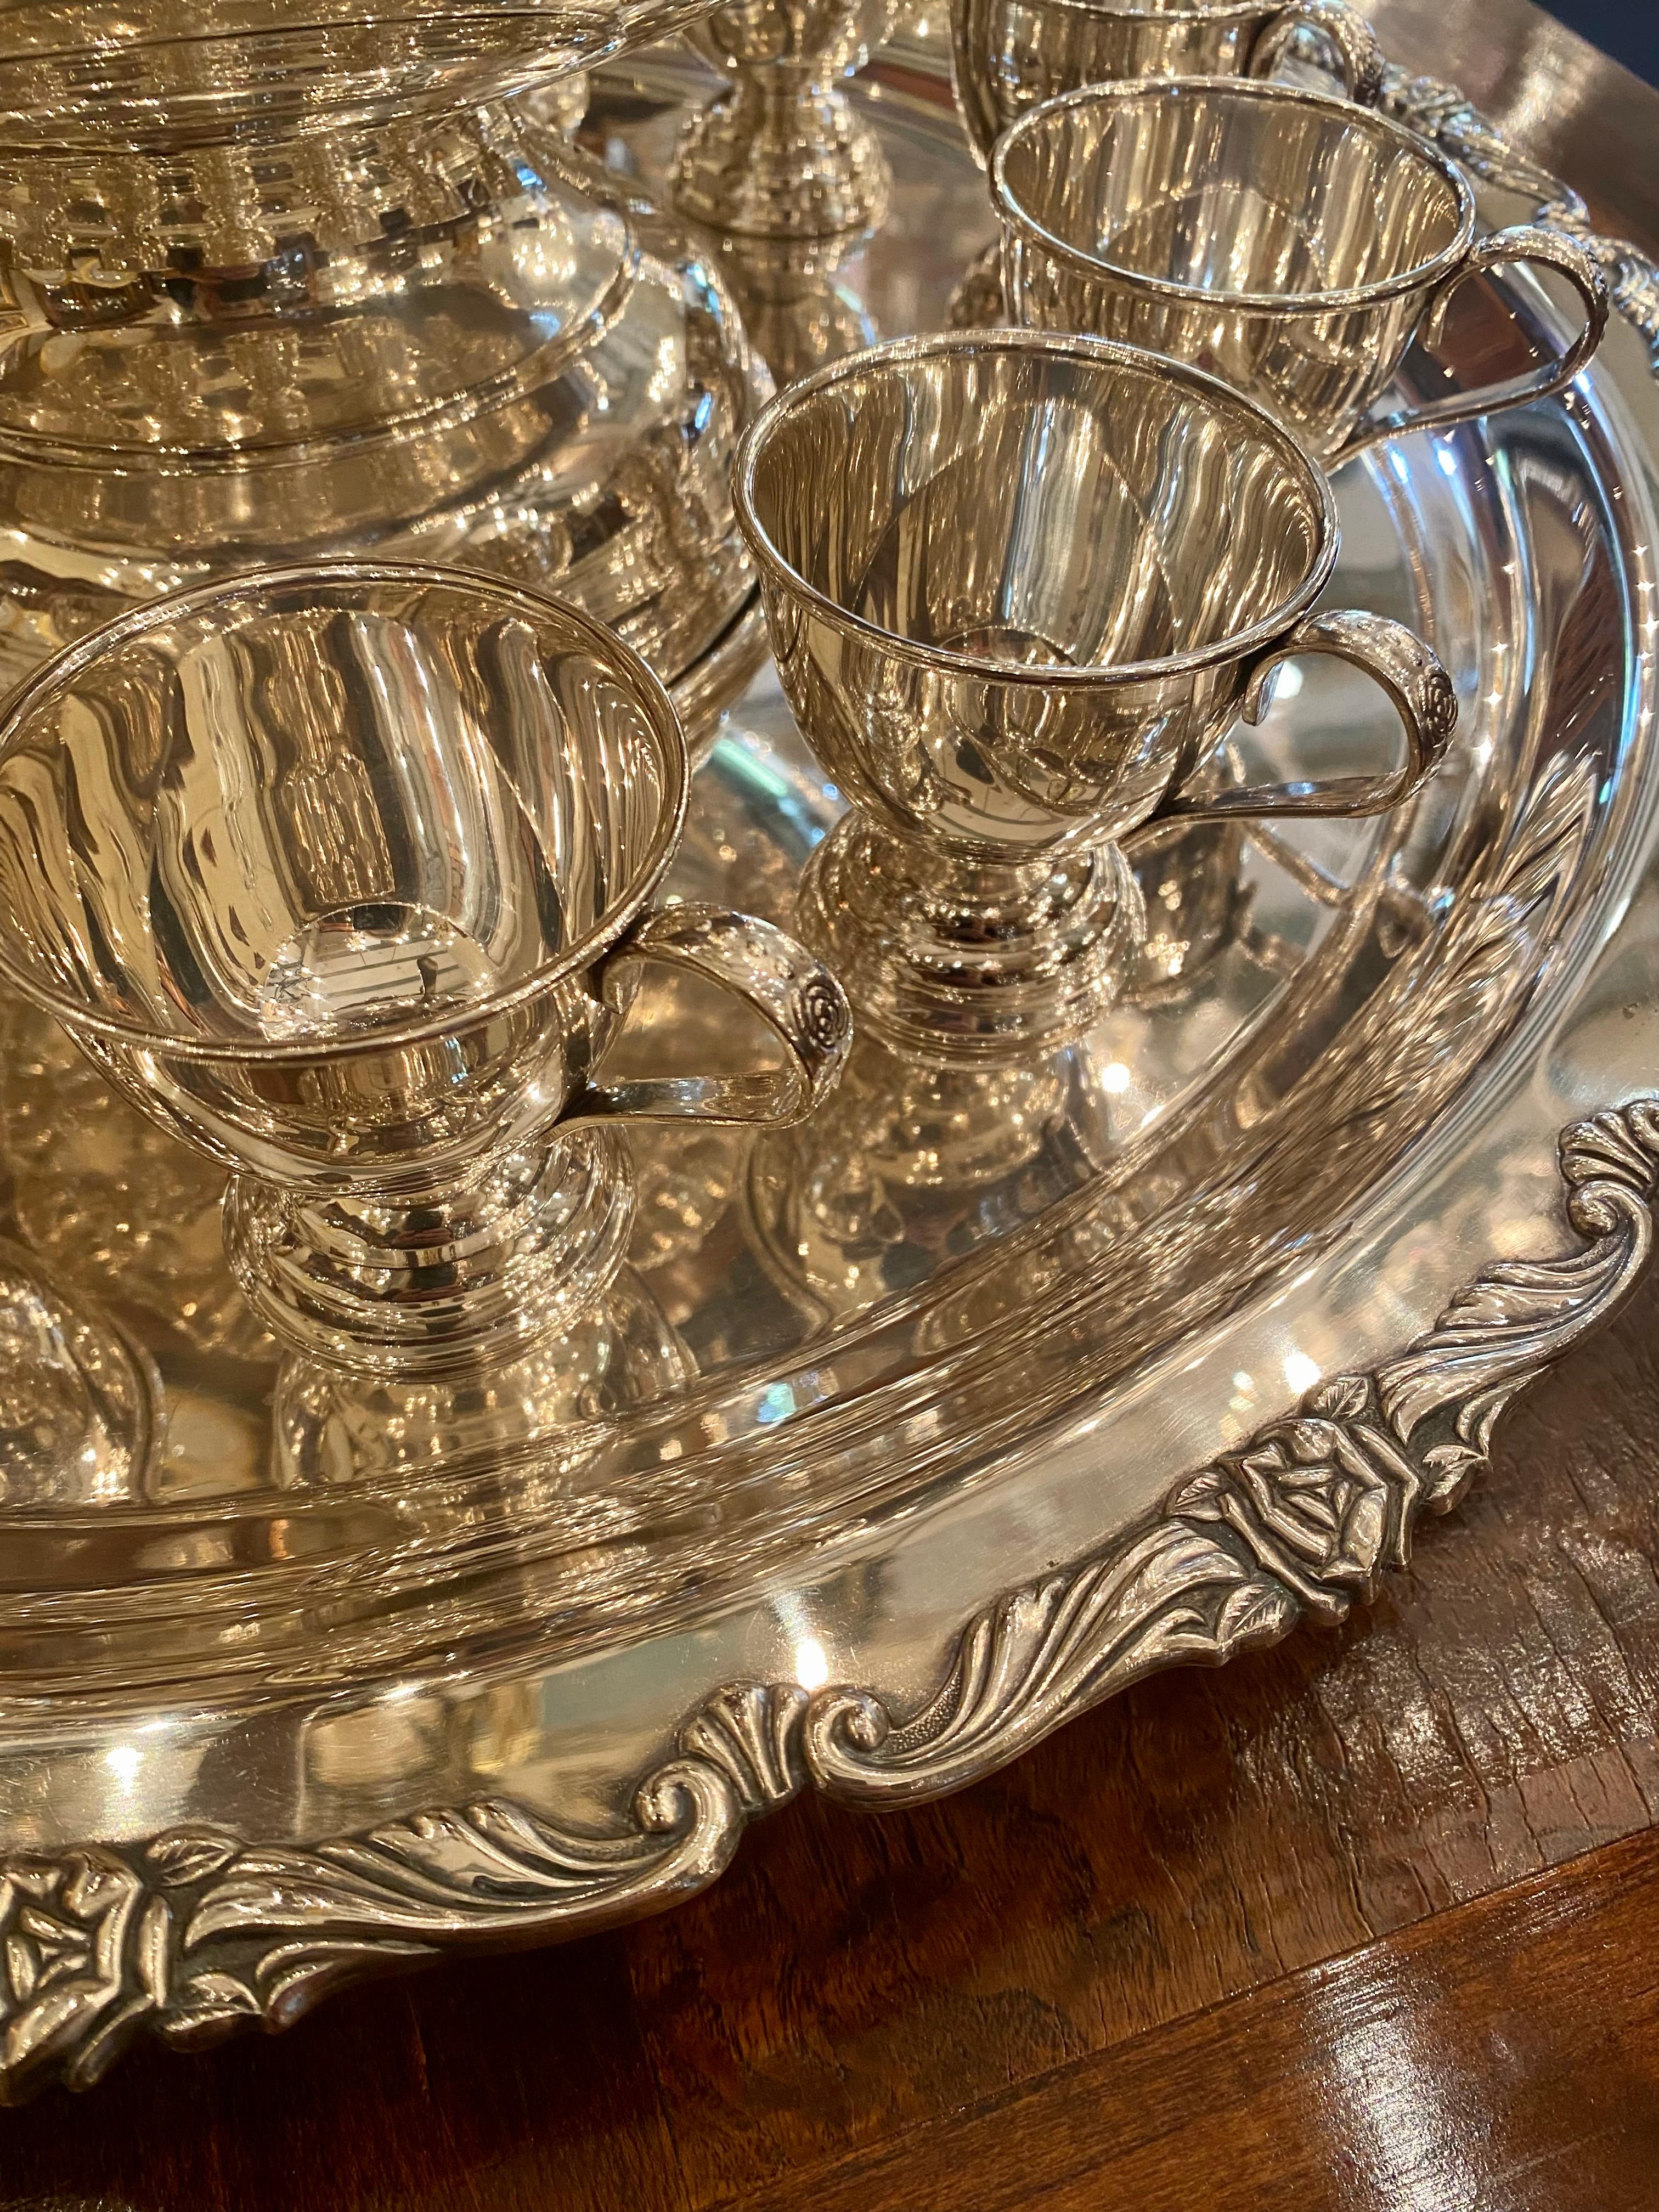 20th Century Estate Silver-Plated Punch Bowl Service with 12 Cups, Tray, & Ladle, circa 1950s